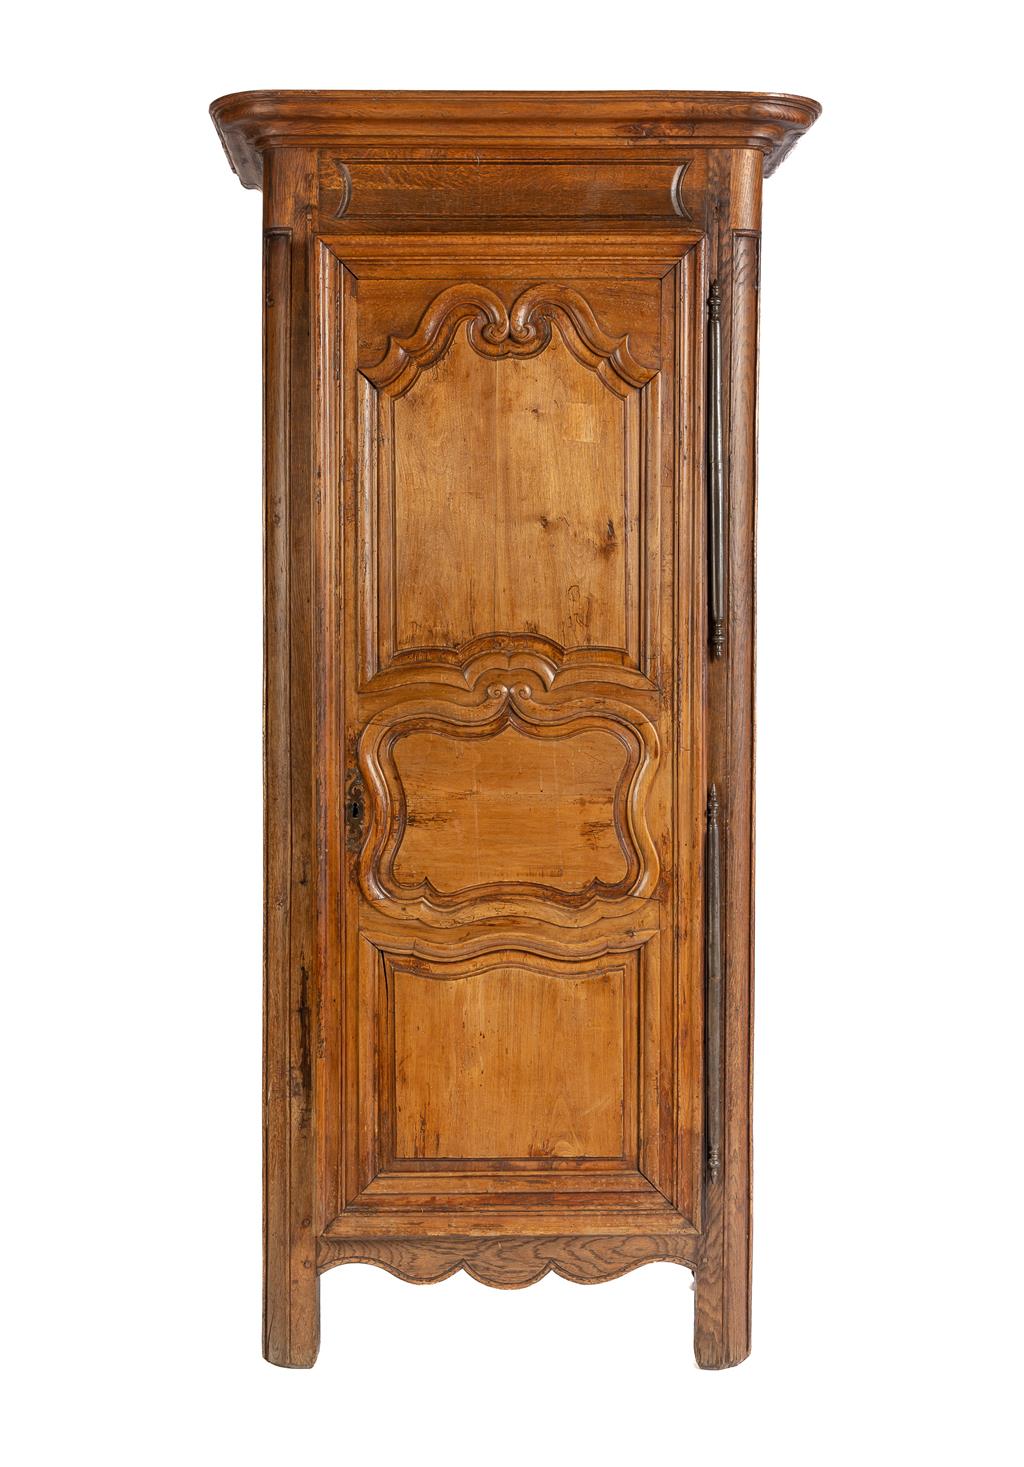 A charming and unique antique French 18th Century 'Bonnetiere' Armoire